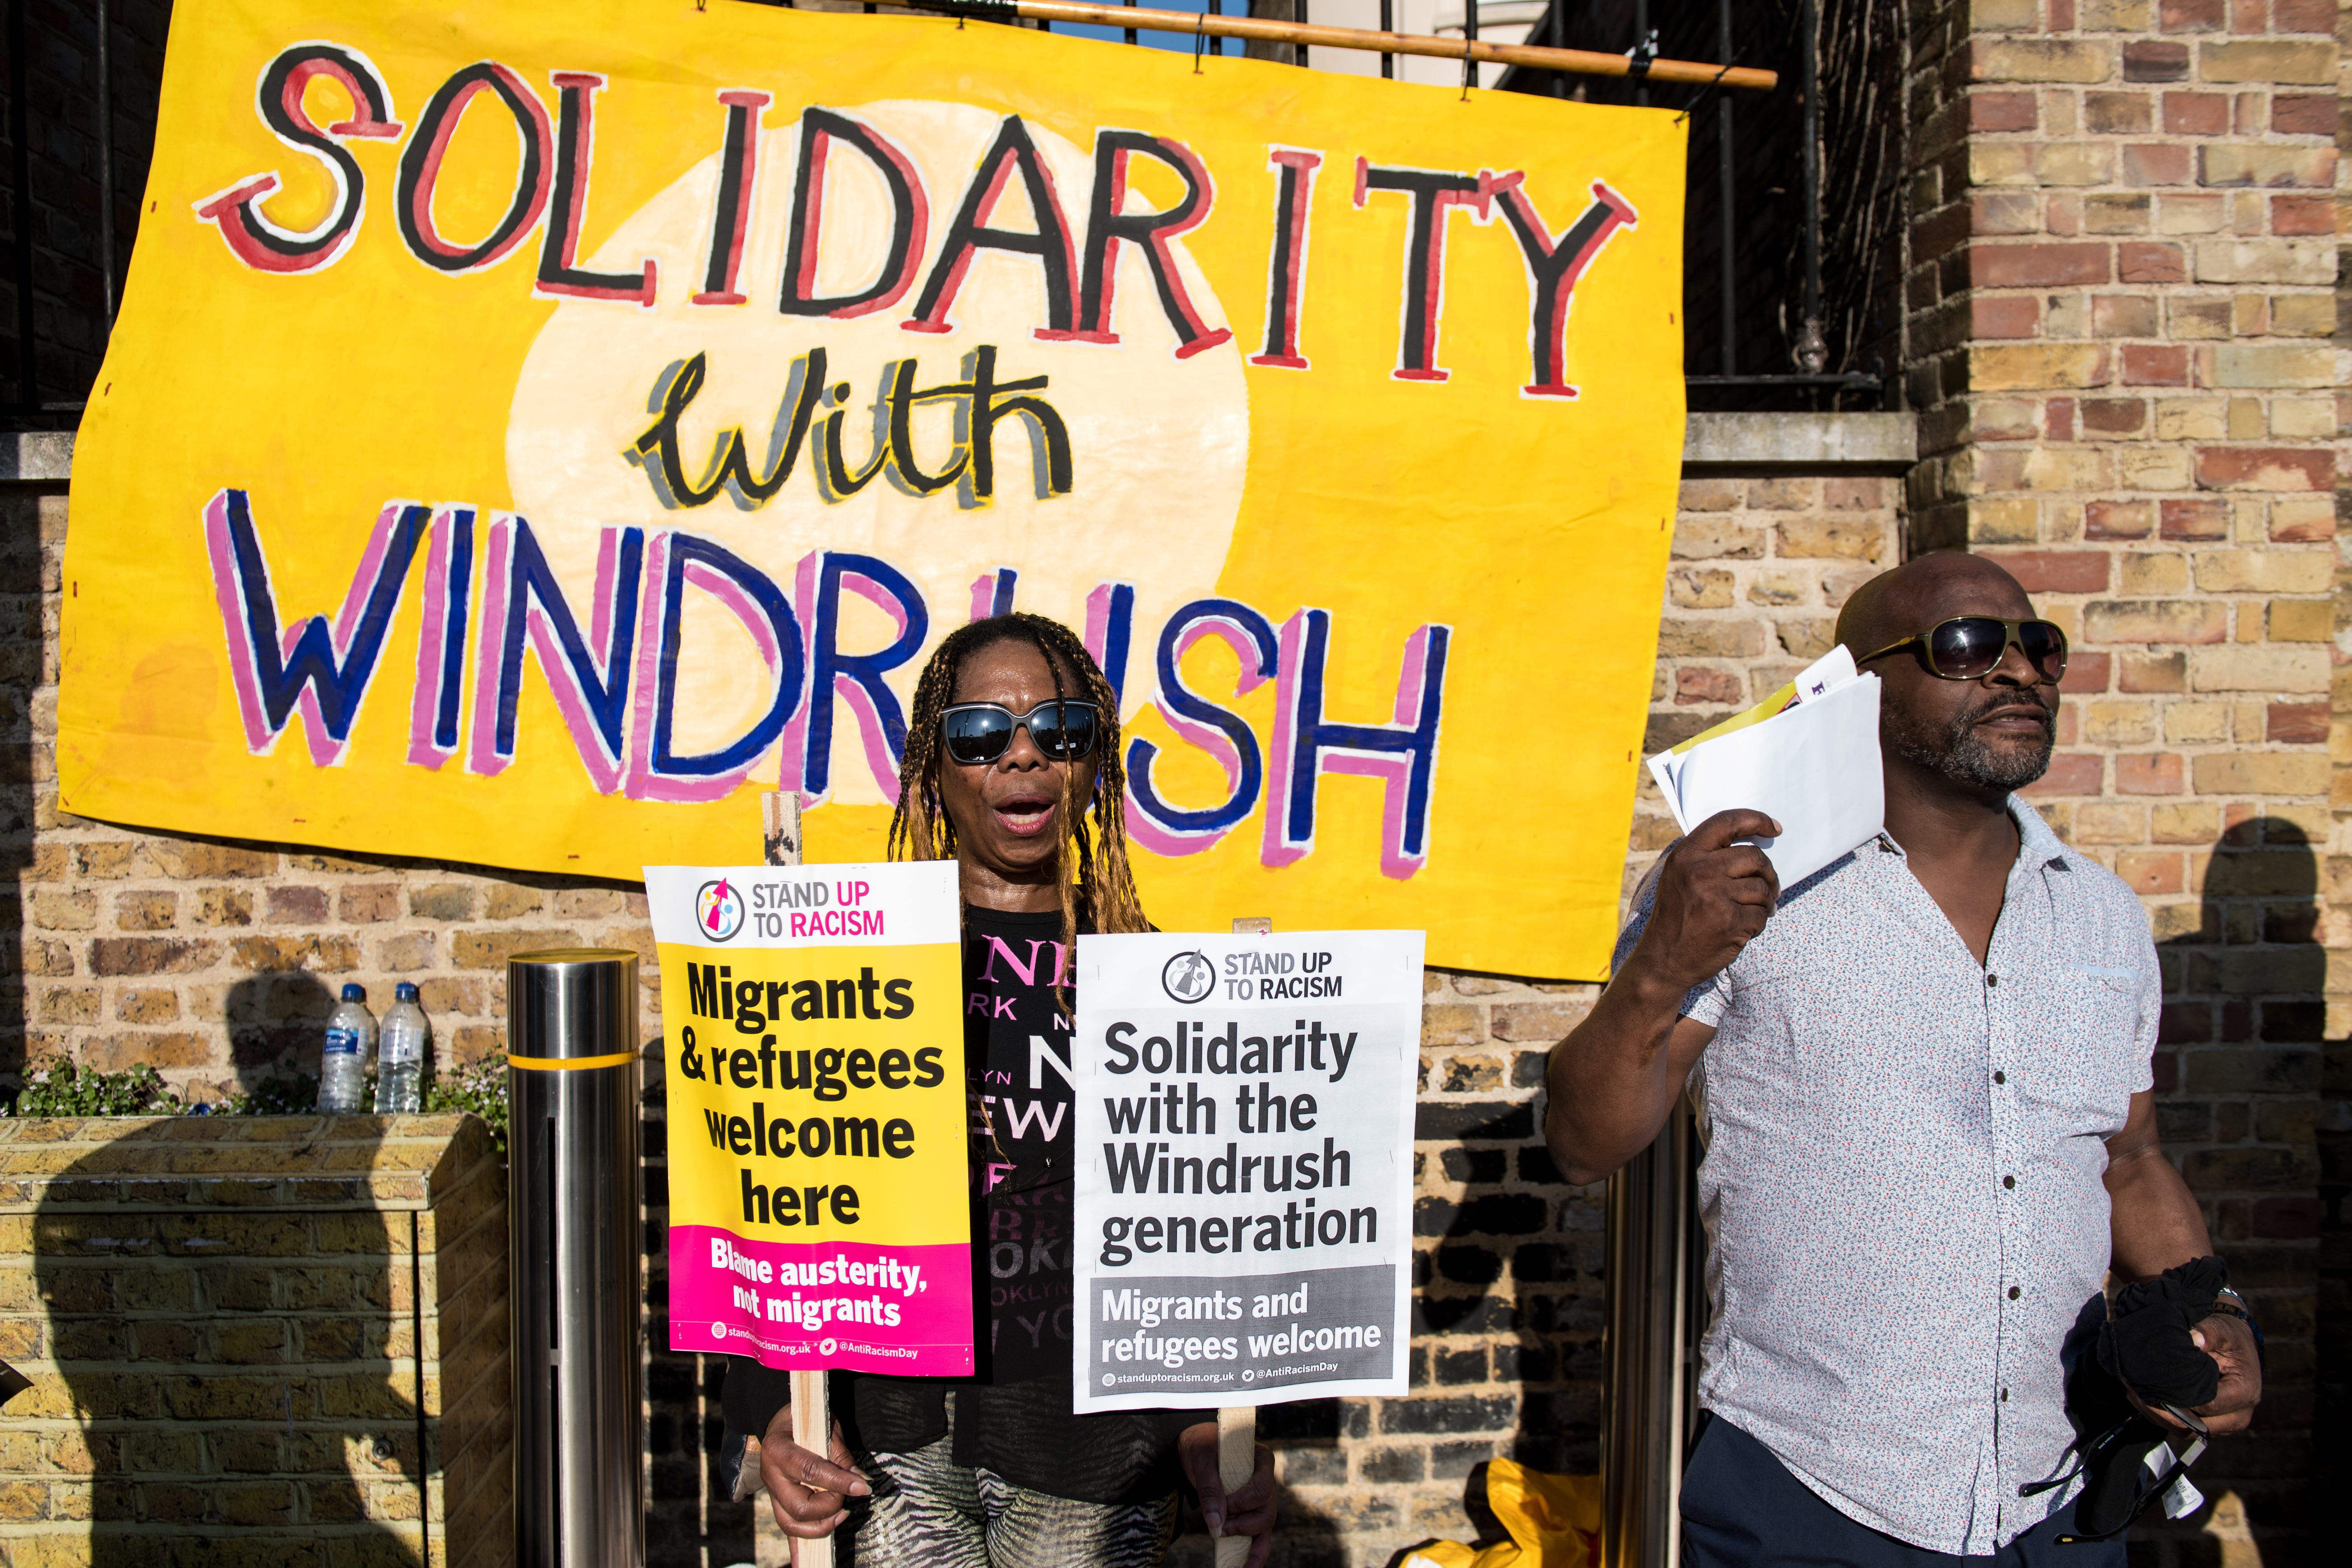 Many people from the Windrush generation were wrongly deported from the UK because of Home Office mistakes